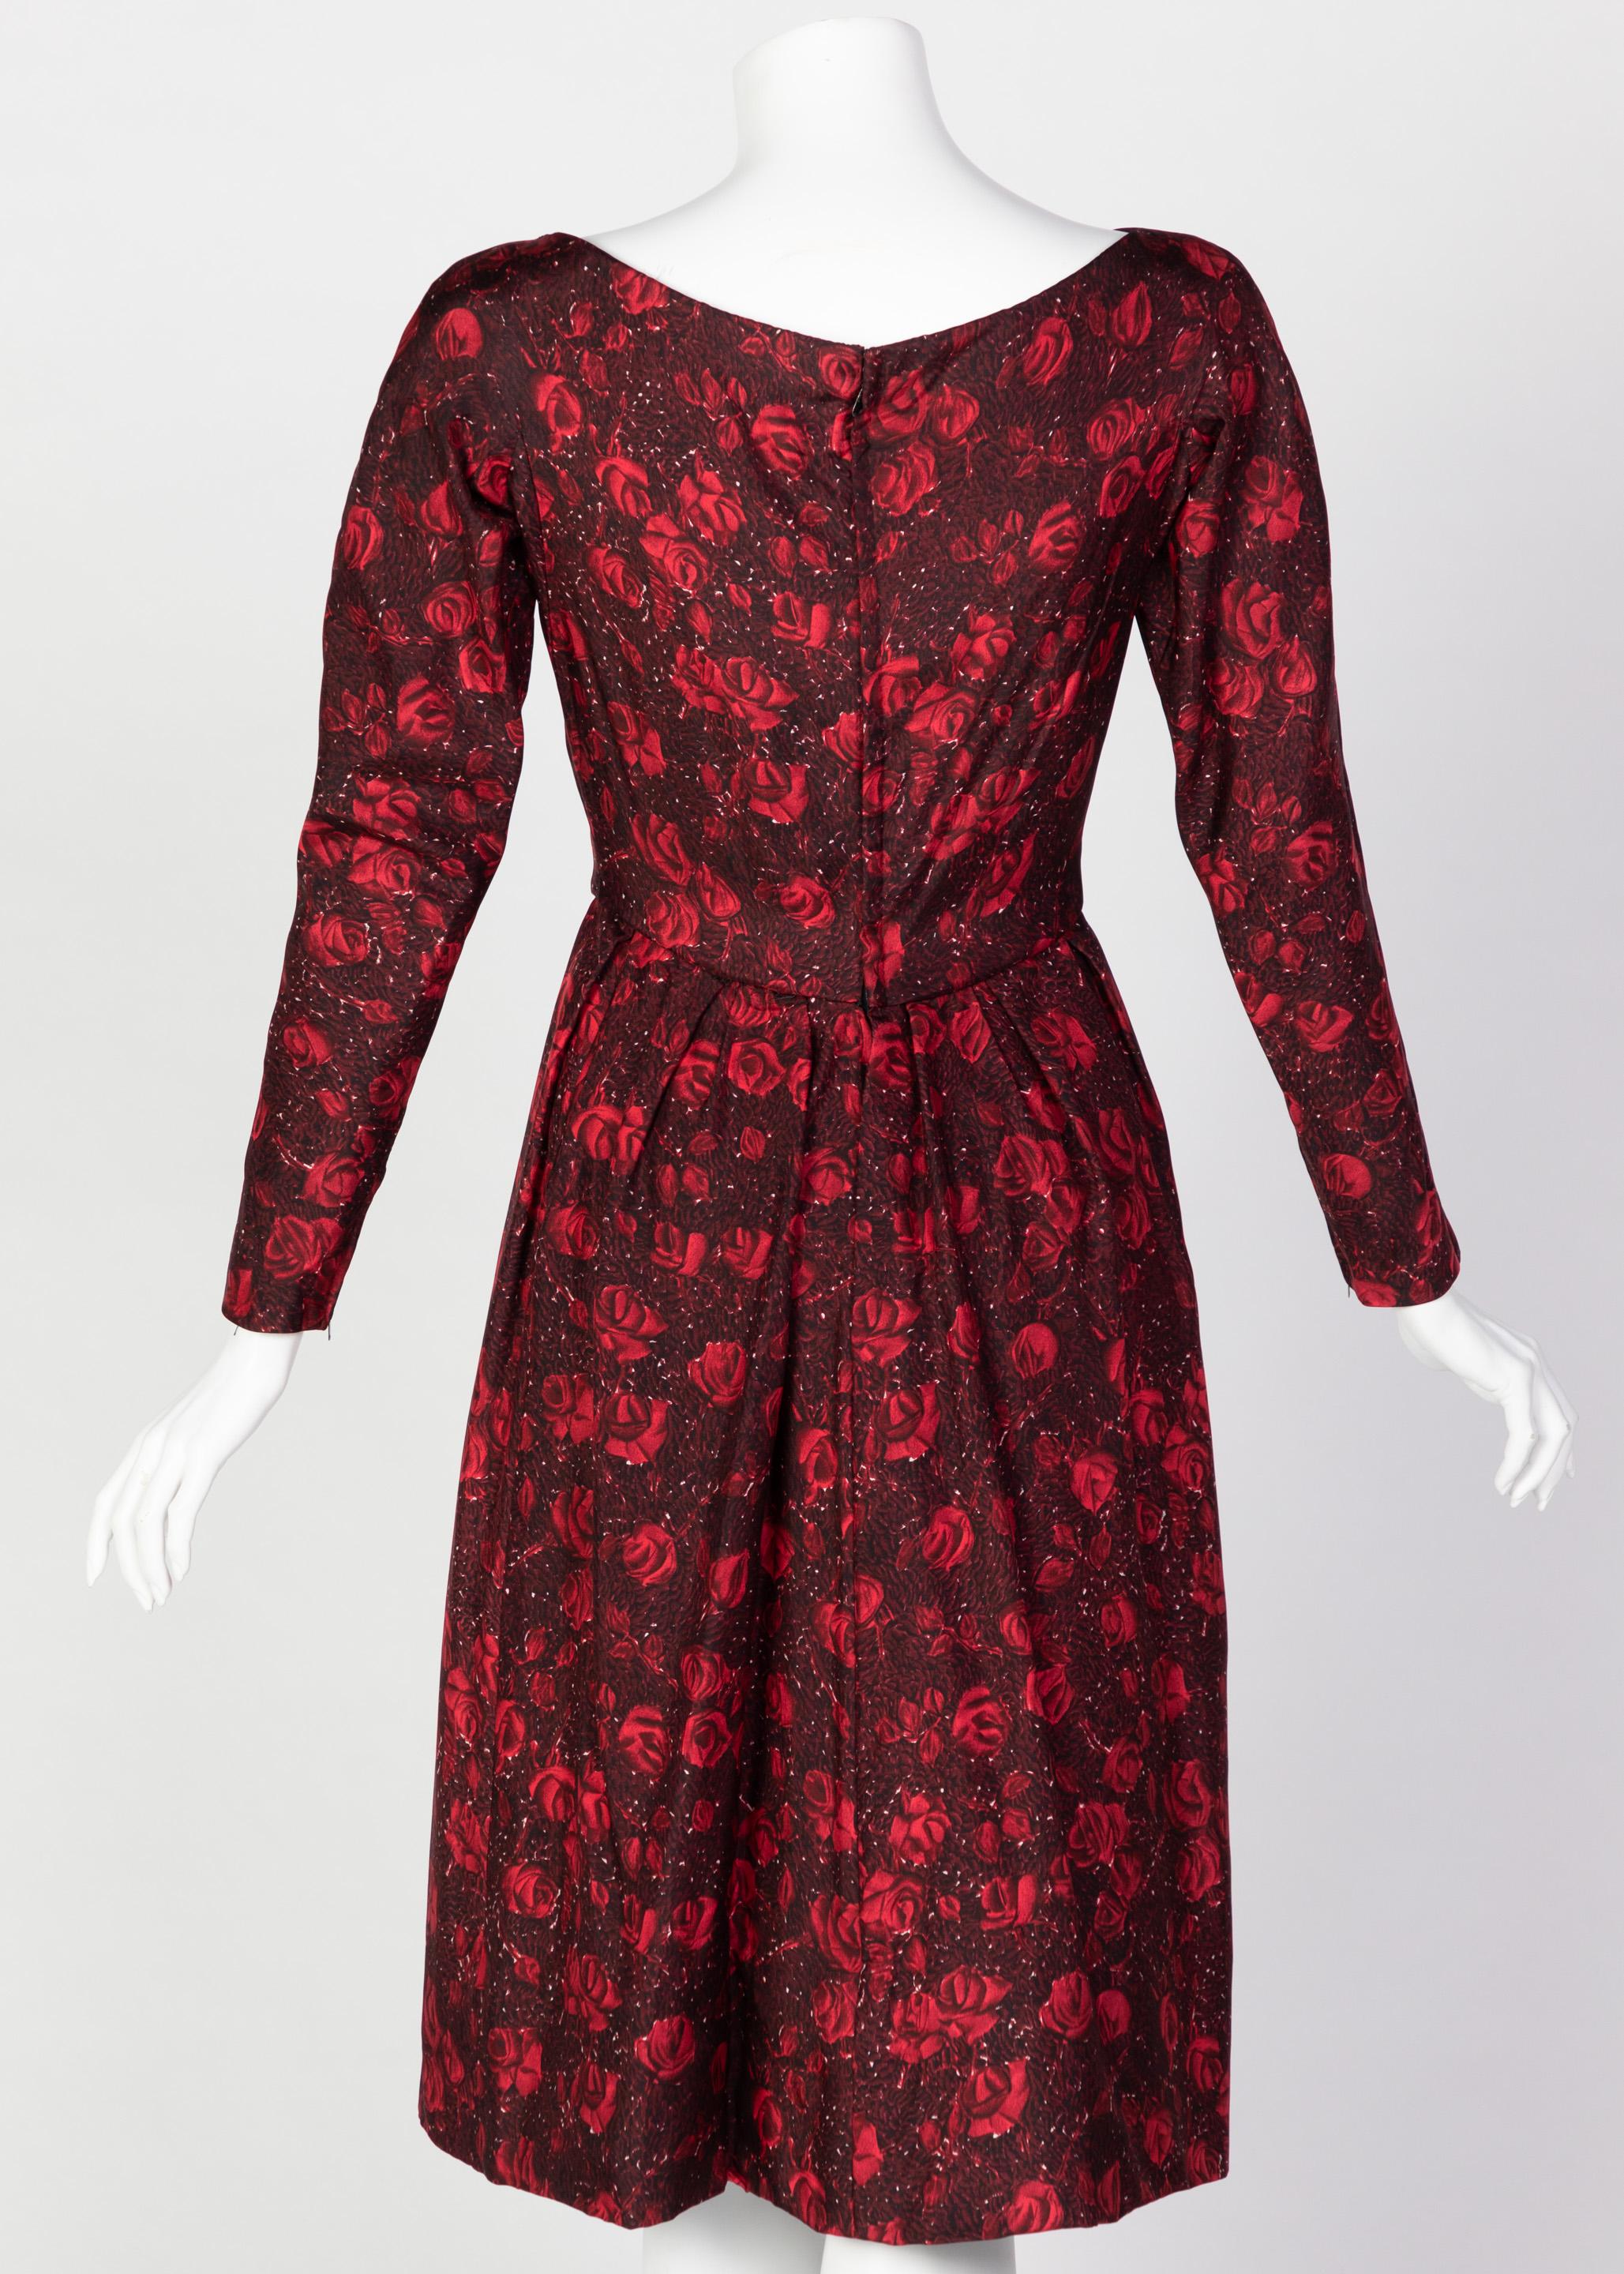 Brown Christian Dior Demi-Couture Red Black Floral Silk Dress, 1950s